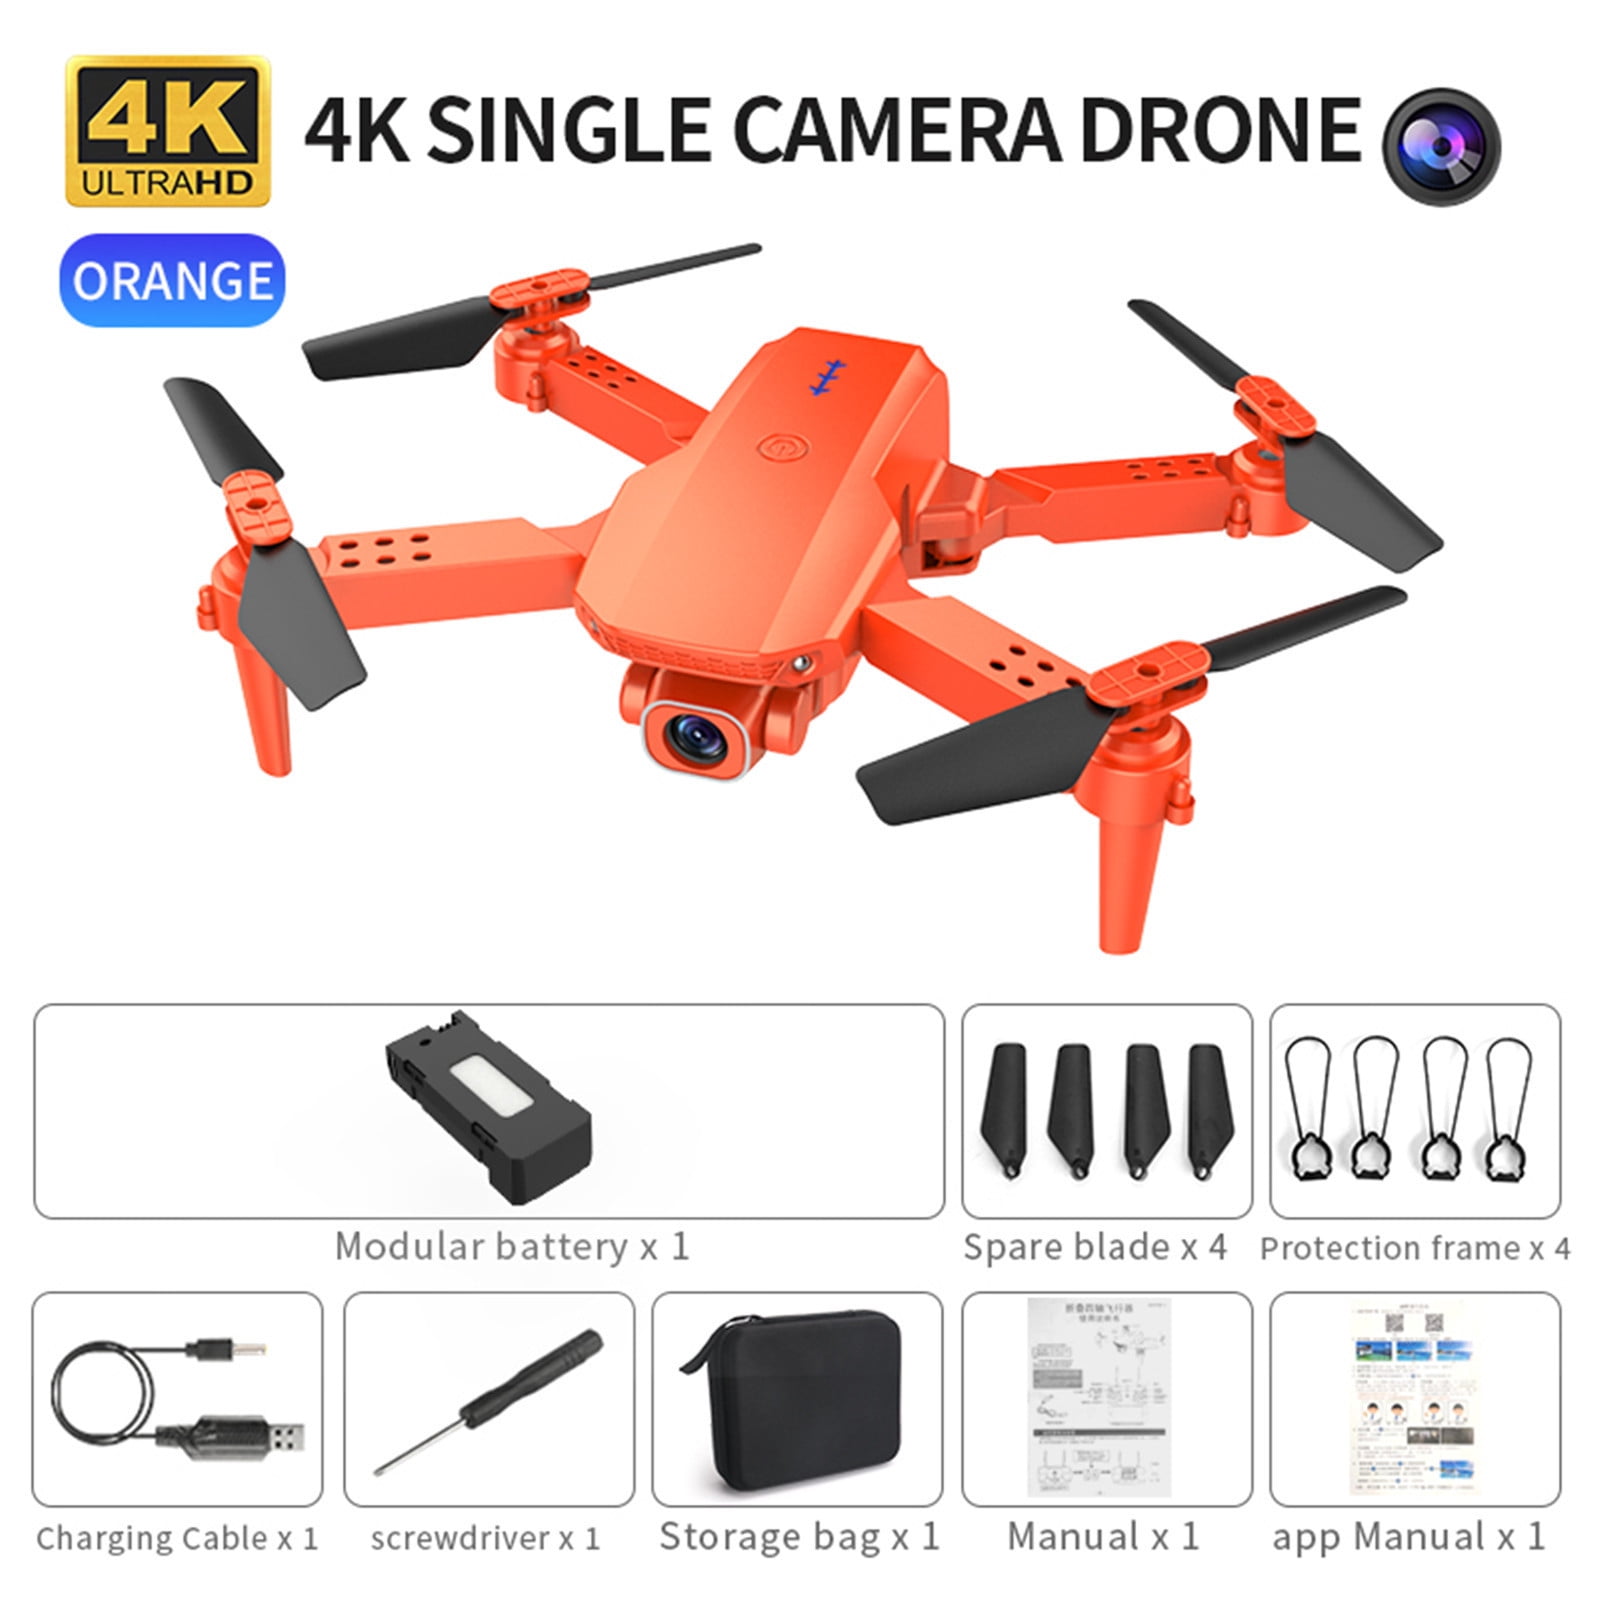 Yyeselk K5 Mini Drone with 4K Camera for Adults, RC FPV GPS Drone with WiFi  Live Video, Auto Return Home, Altitude Hold, Follow Me, Custom Flight  Path,Storage Bag 